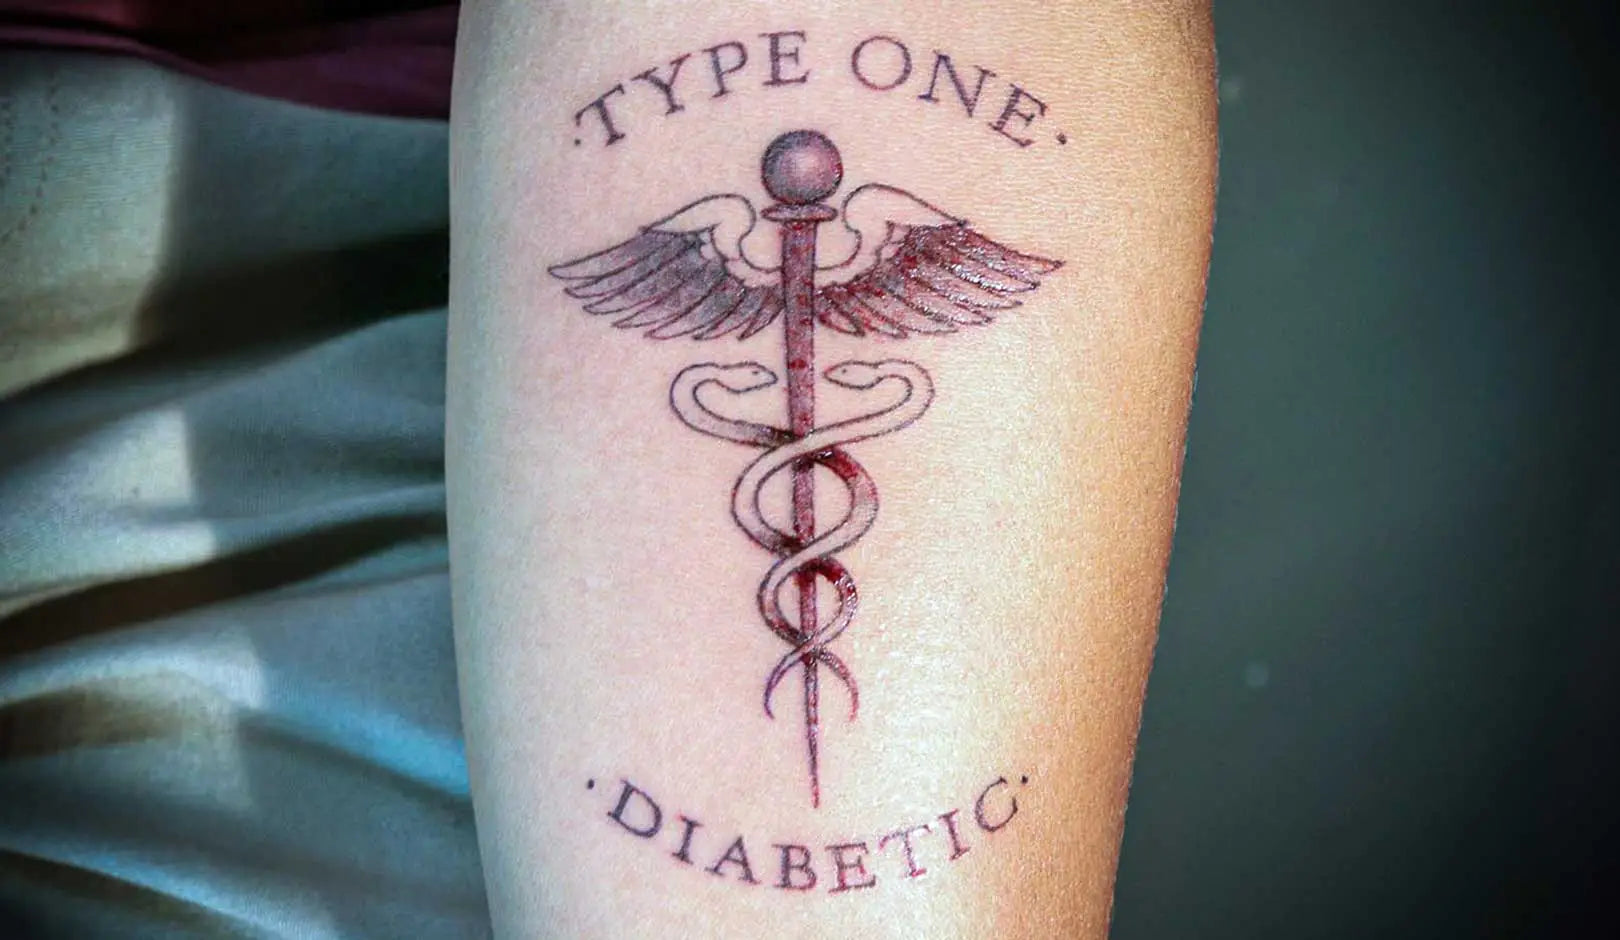 Can I get a tattoo if I have Diabetes? Here's What You Need to Know